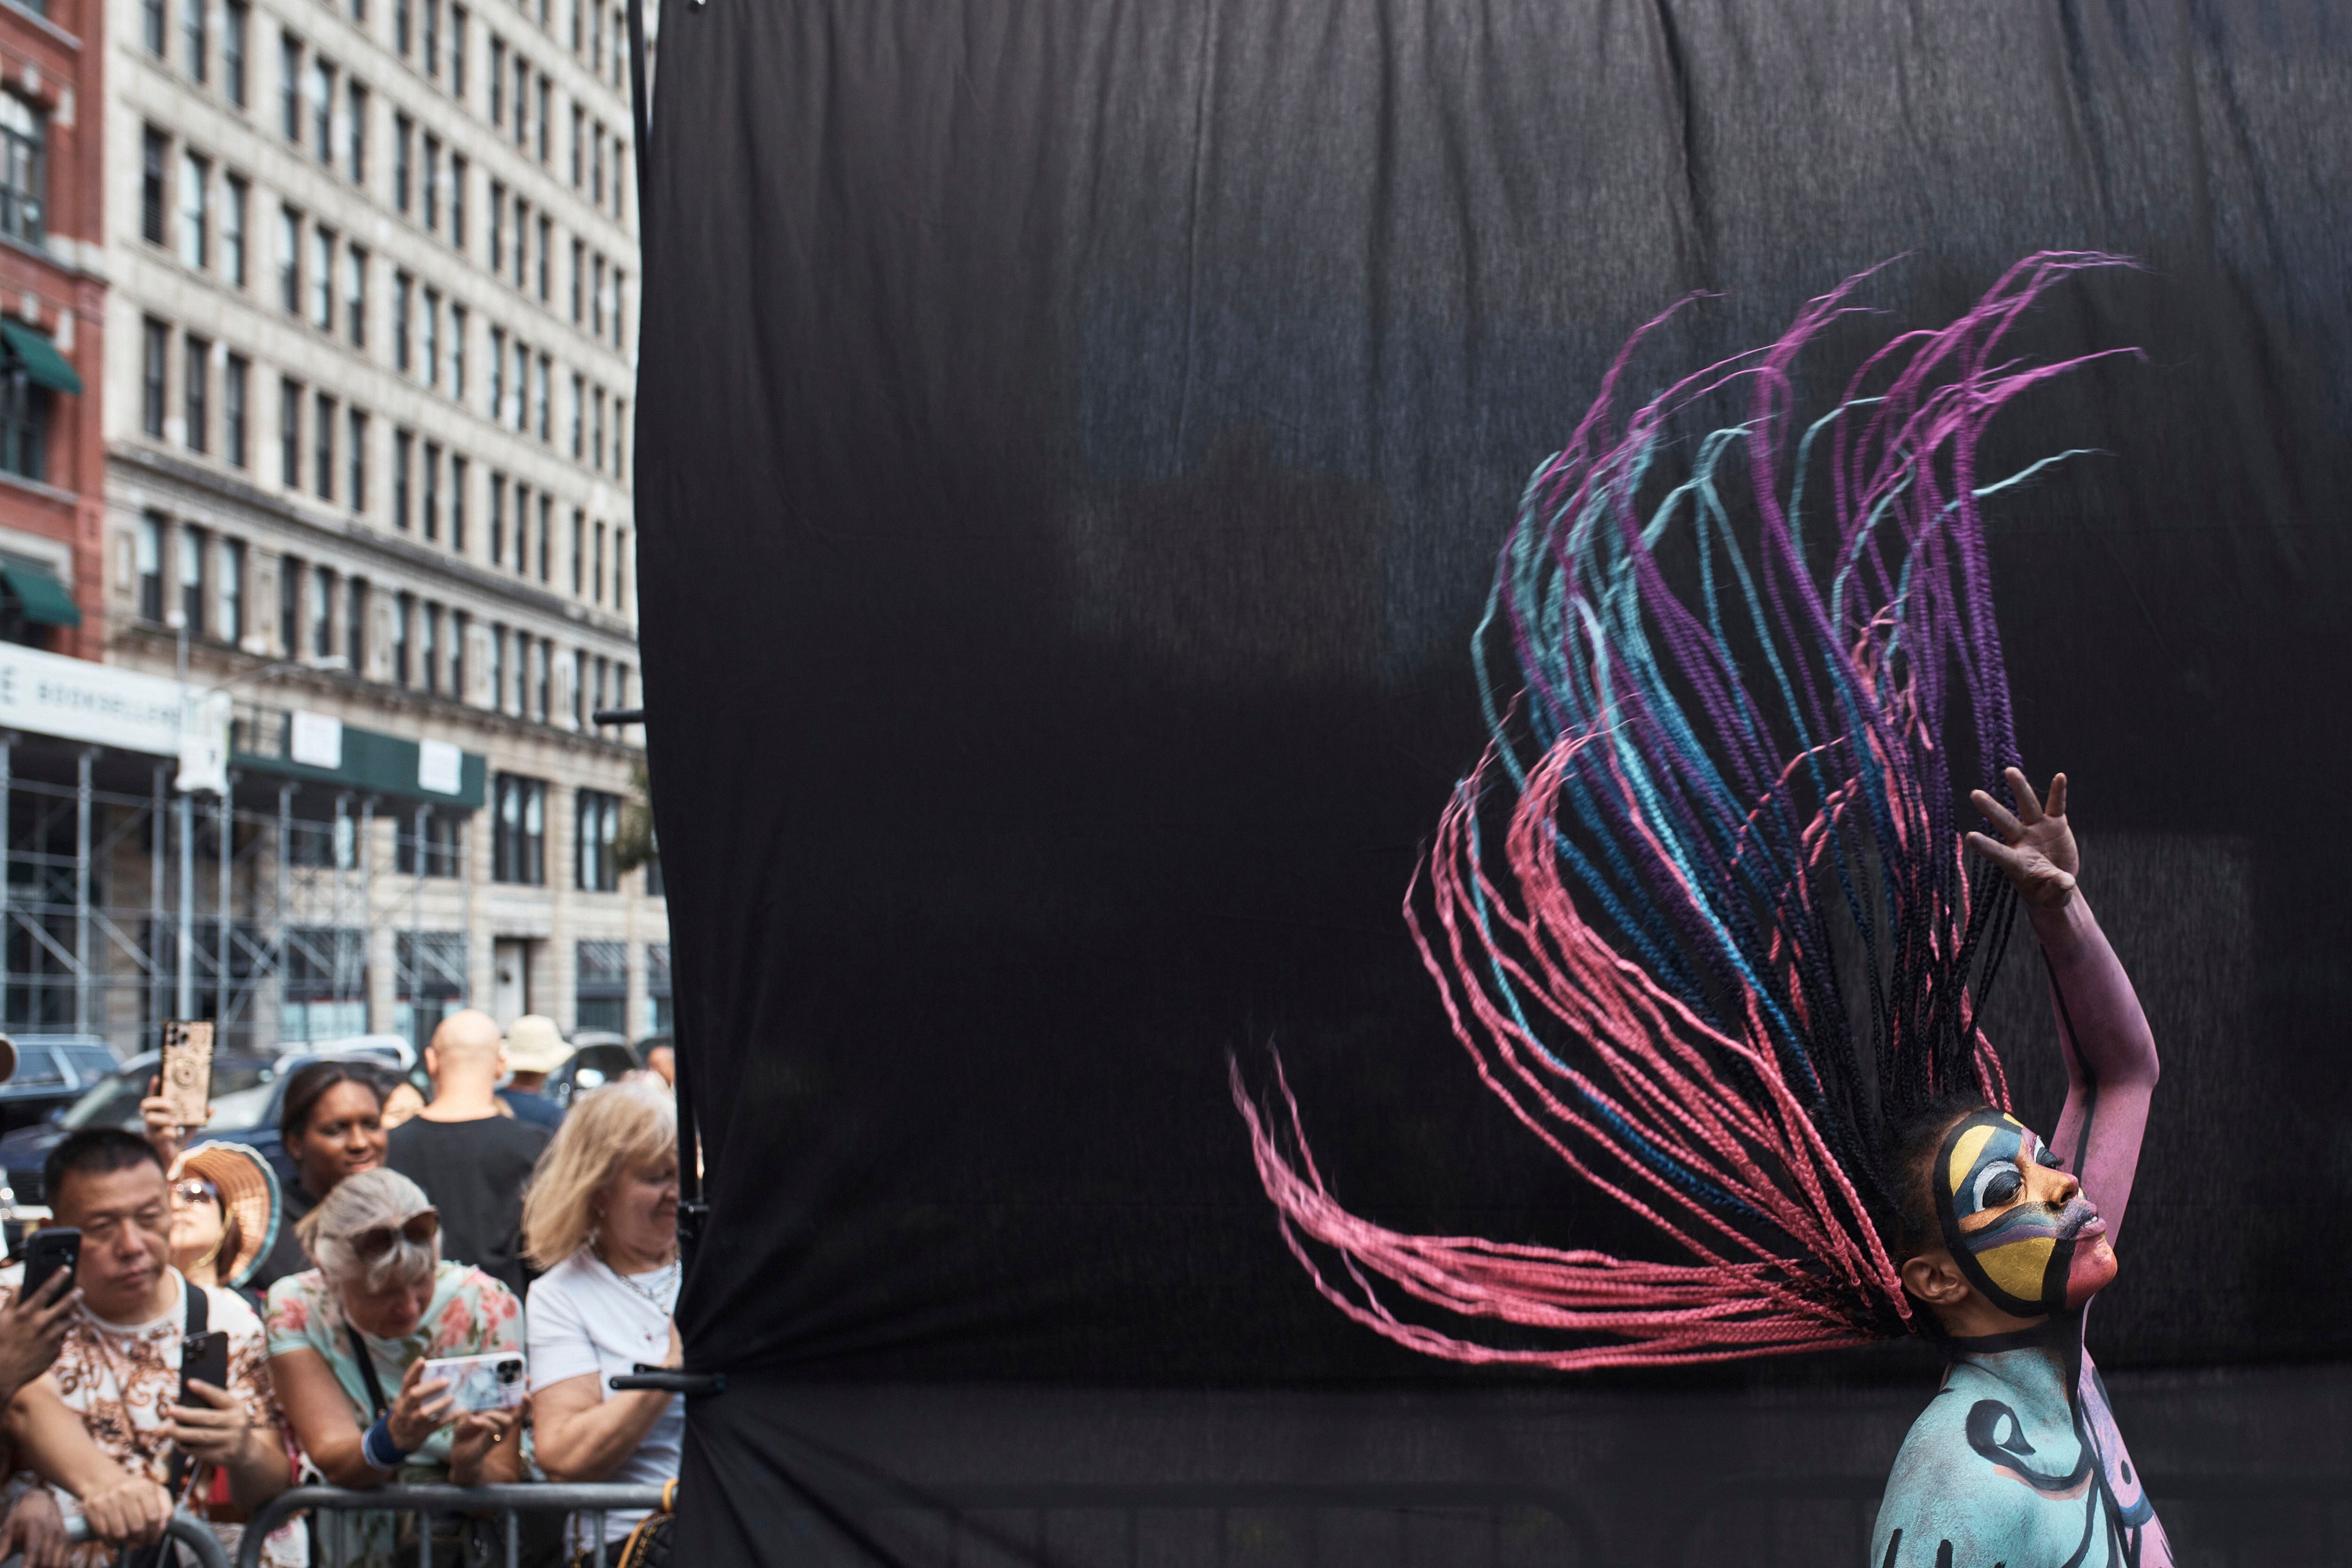 A Nude Body Painting Event Is Taking Over Union Square